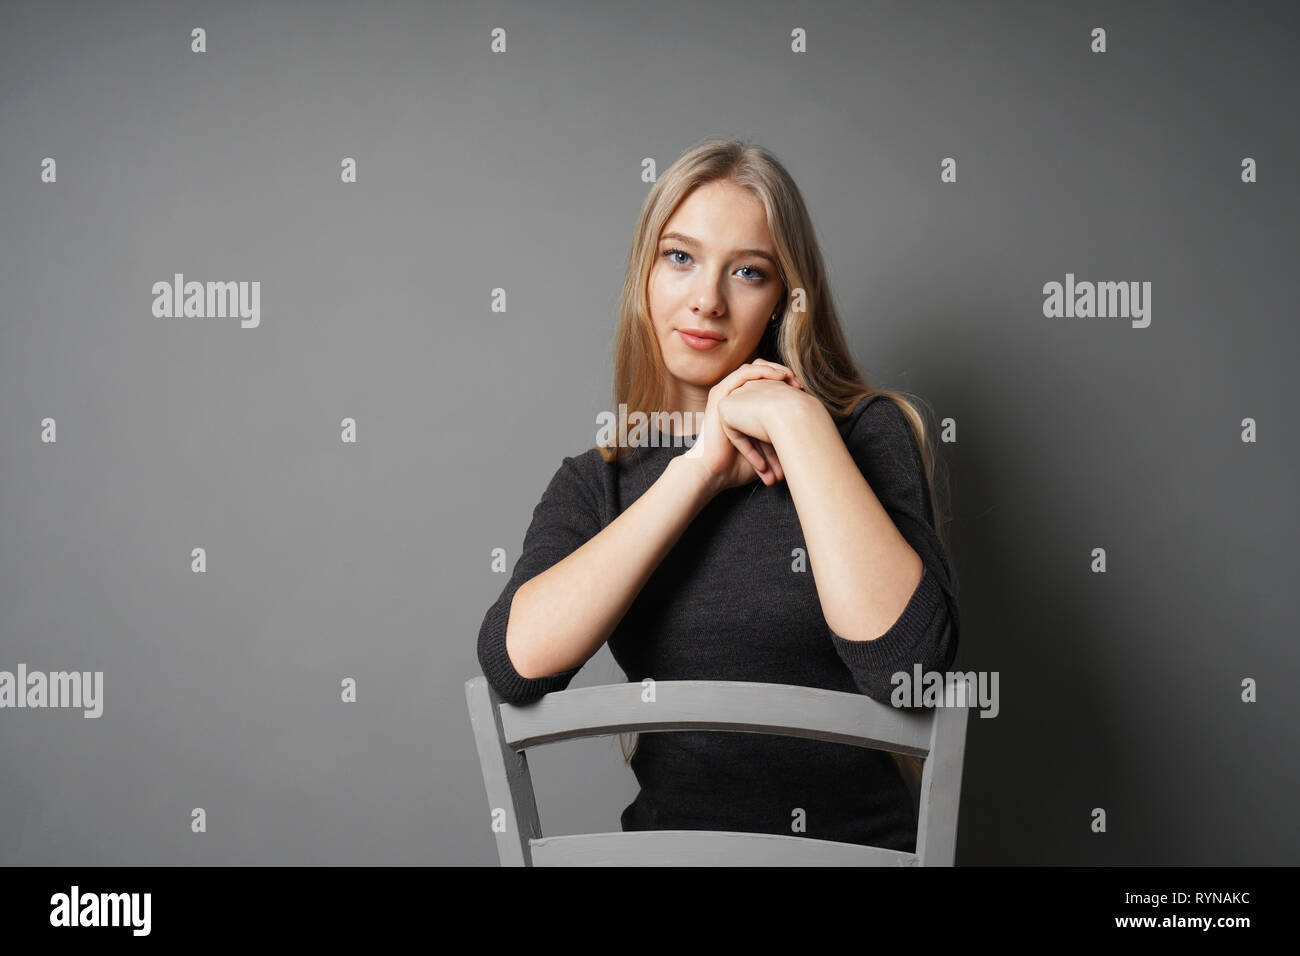 serene young woman sitting astride on chair Stock Photo